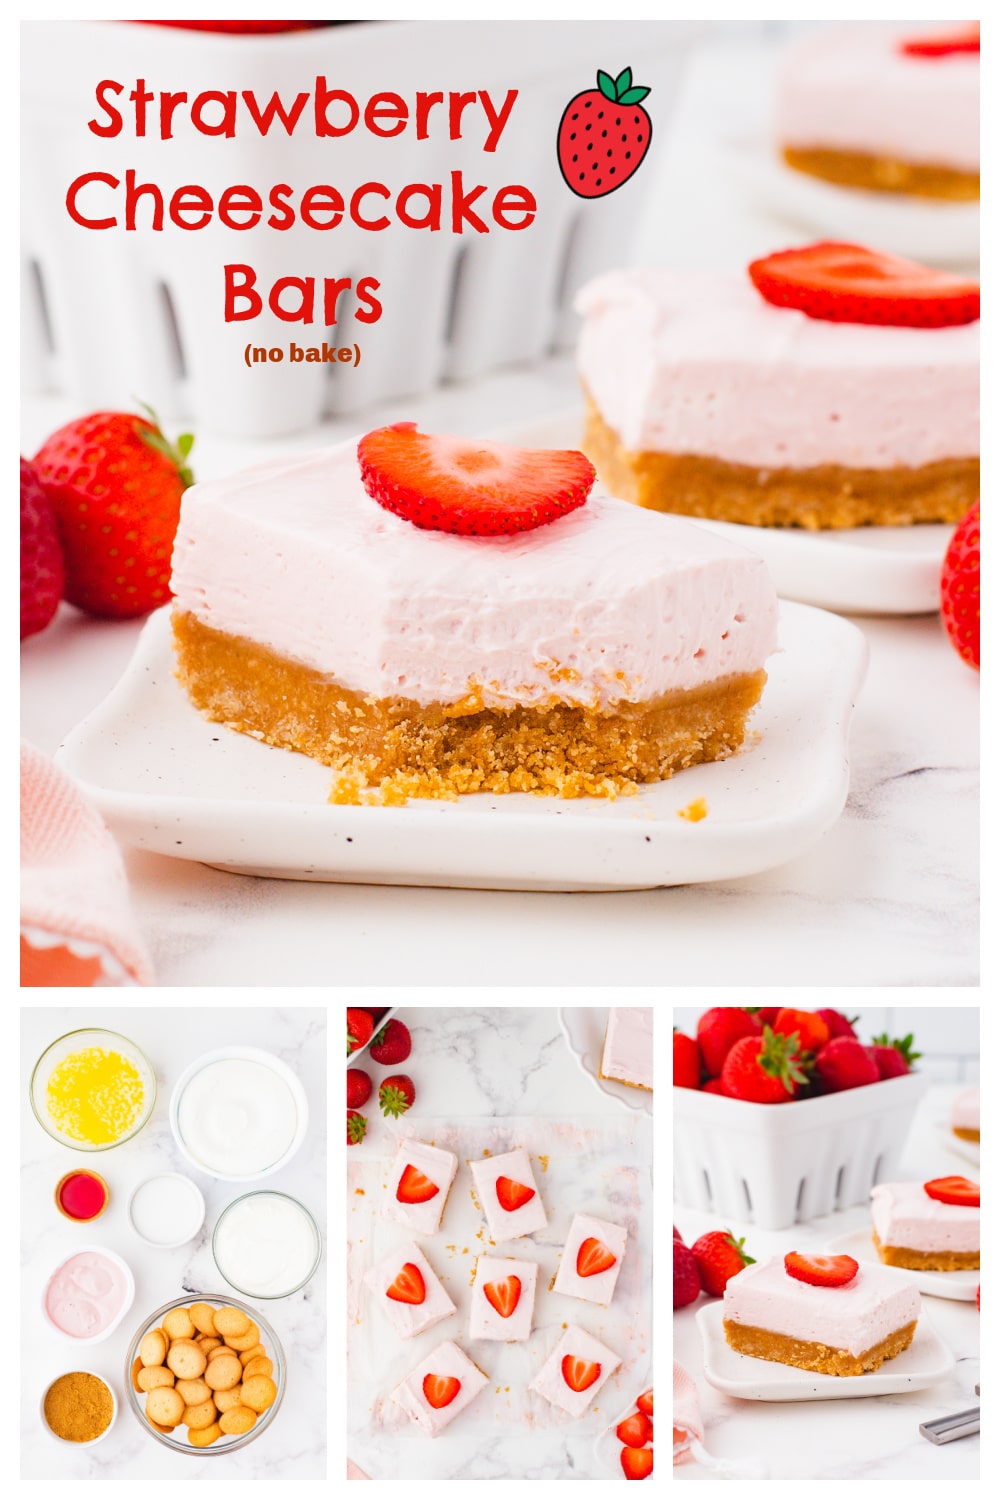 Creamy, no-bake Strawberry Cheesecake Bars, with a light and airy cream cheese filling, are the ideal, all-occasion dessert you have been dreaming about. The vanilla wafer crust is the perfect complement to this tasty dish. via @cmpollak1